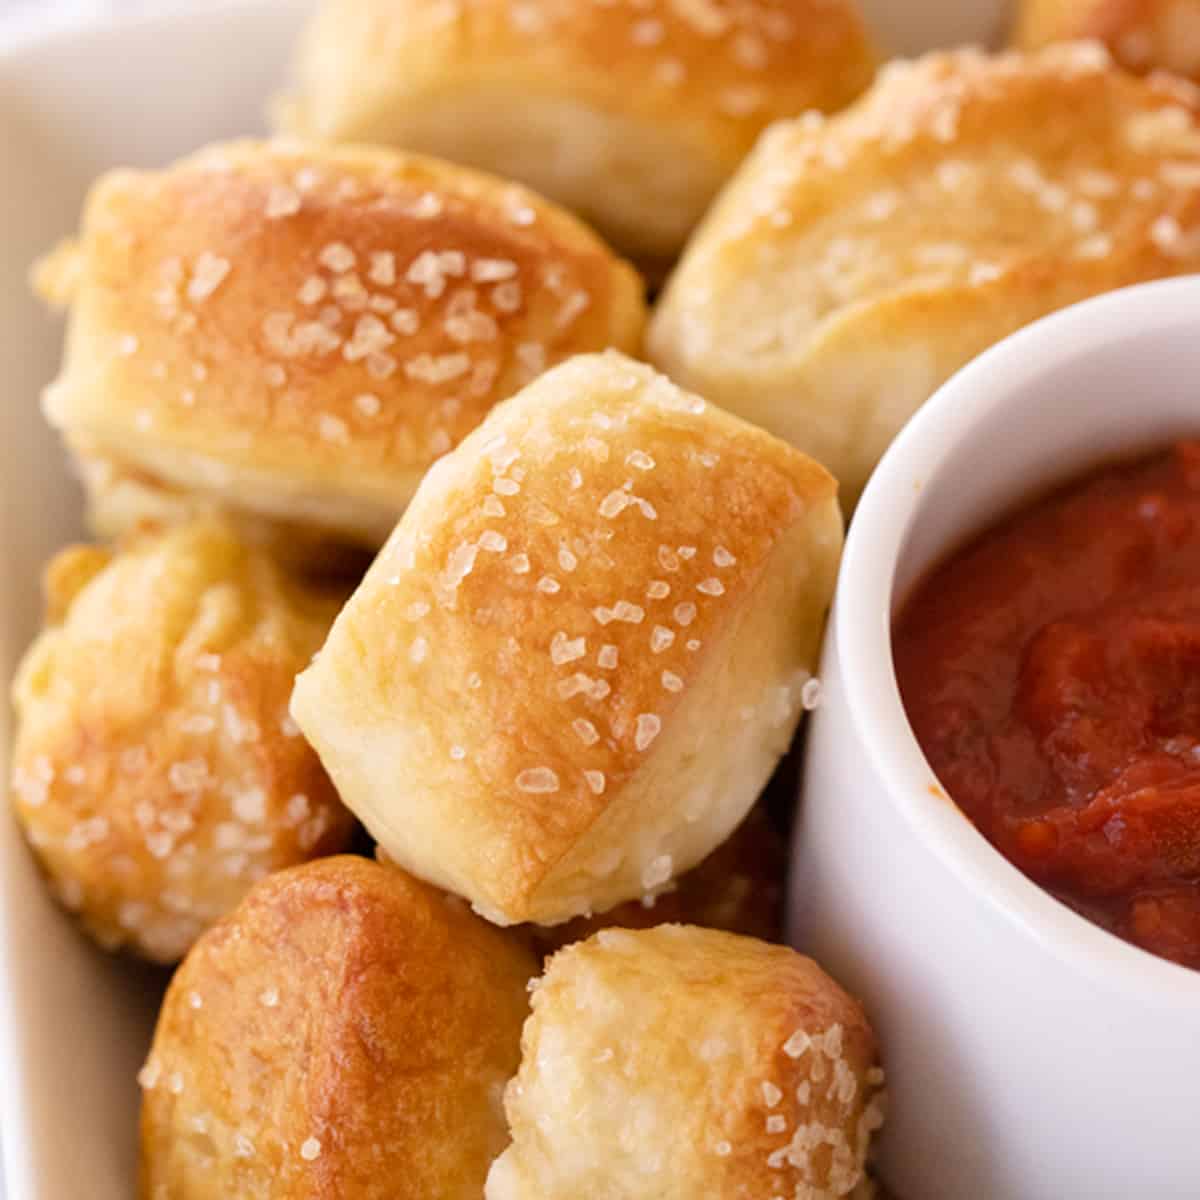 Pretzel bites on a serving dish with a side cup of marinara sauce.